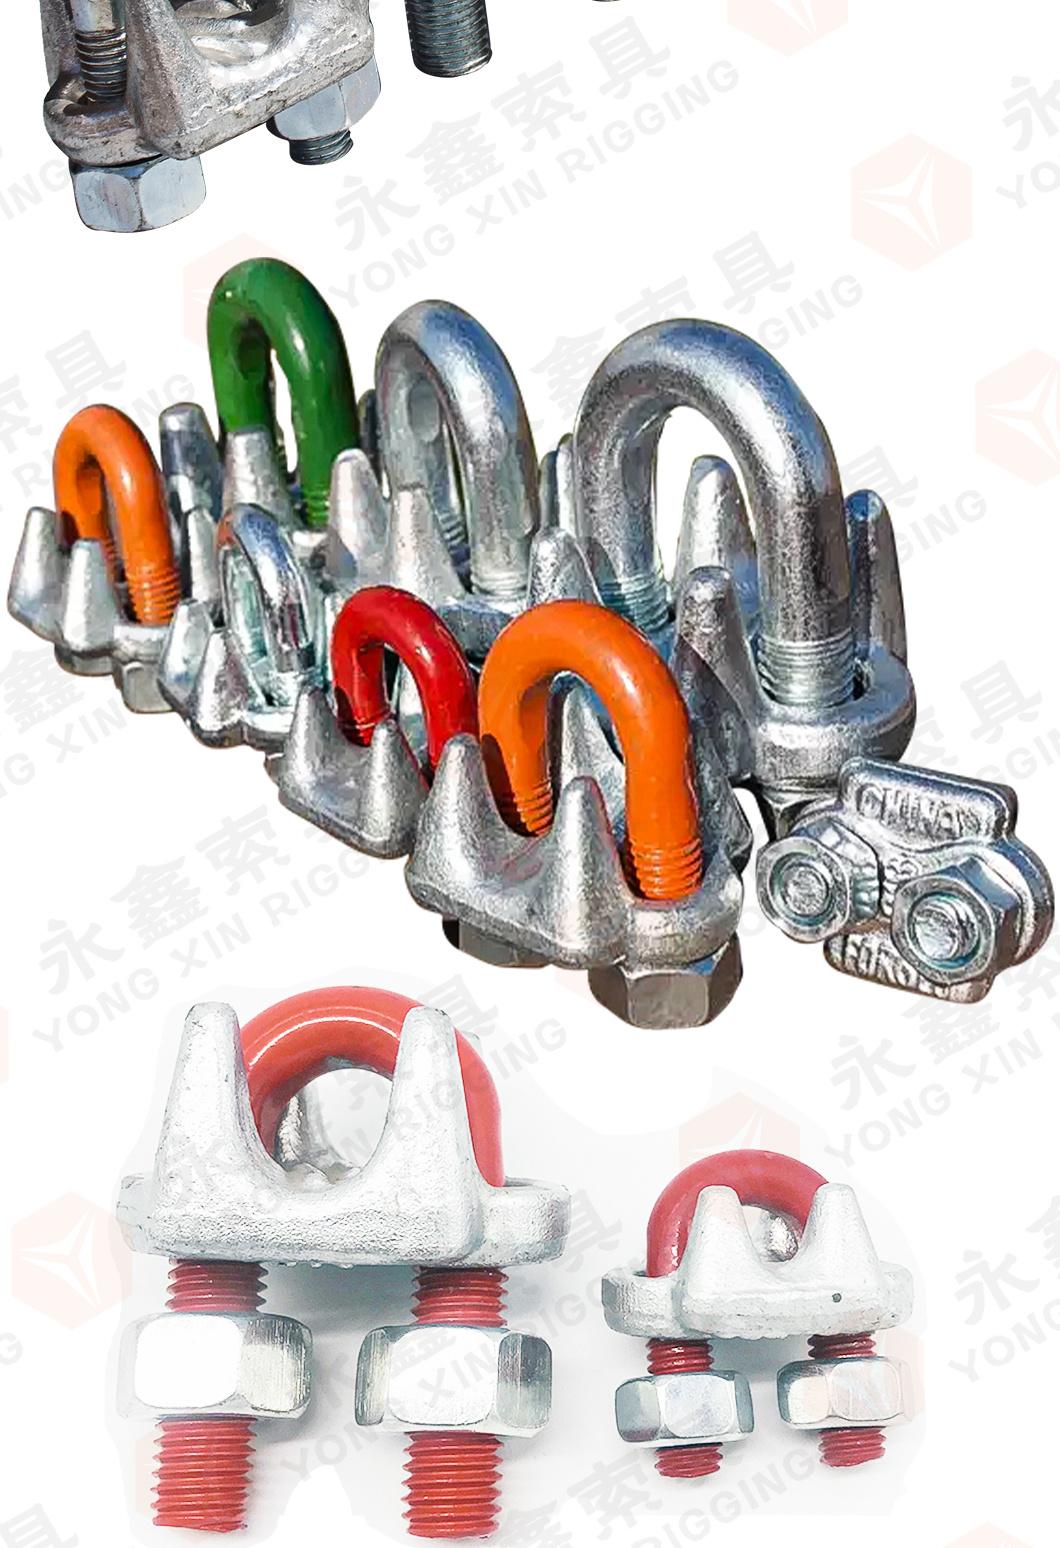 Best Quality G450 1/4 Galvanized Drop Forged Us Type Wire Rope Clip